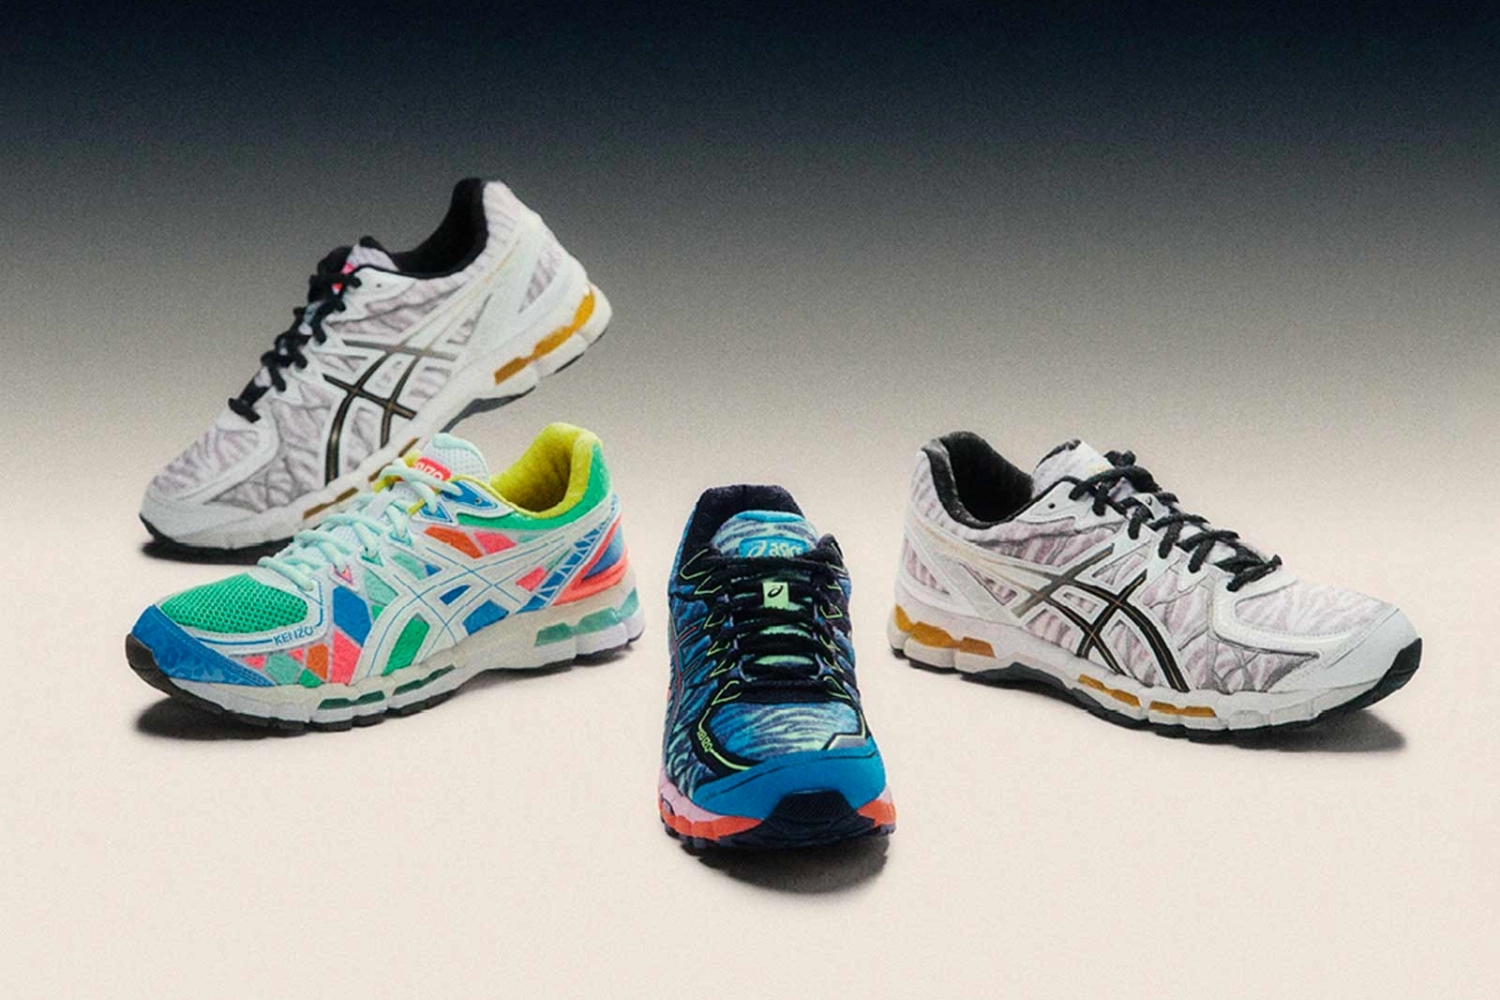 The ASICS GEL-KAYANO 20 model gets a KENZO makeover